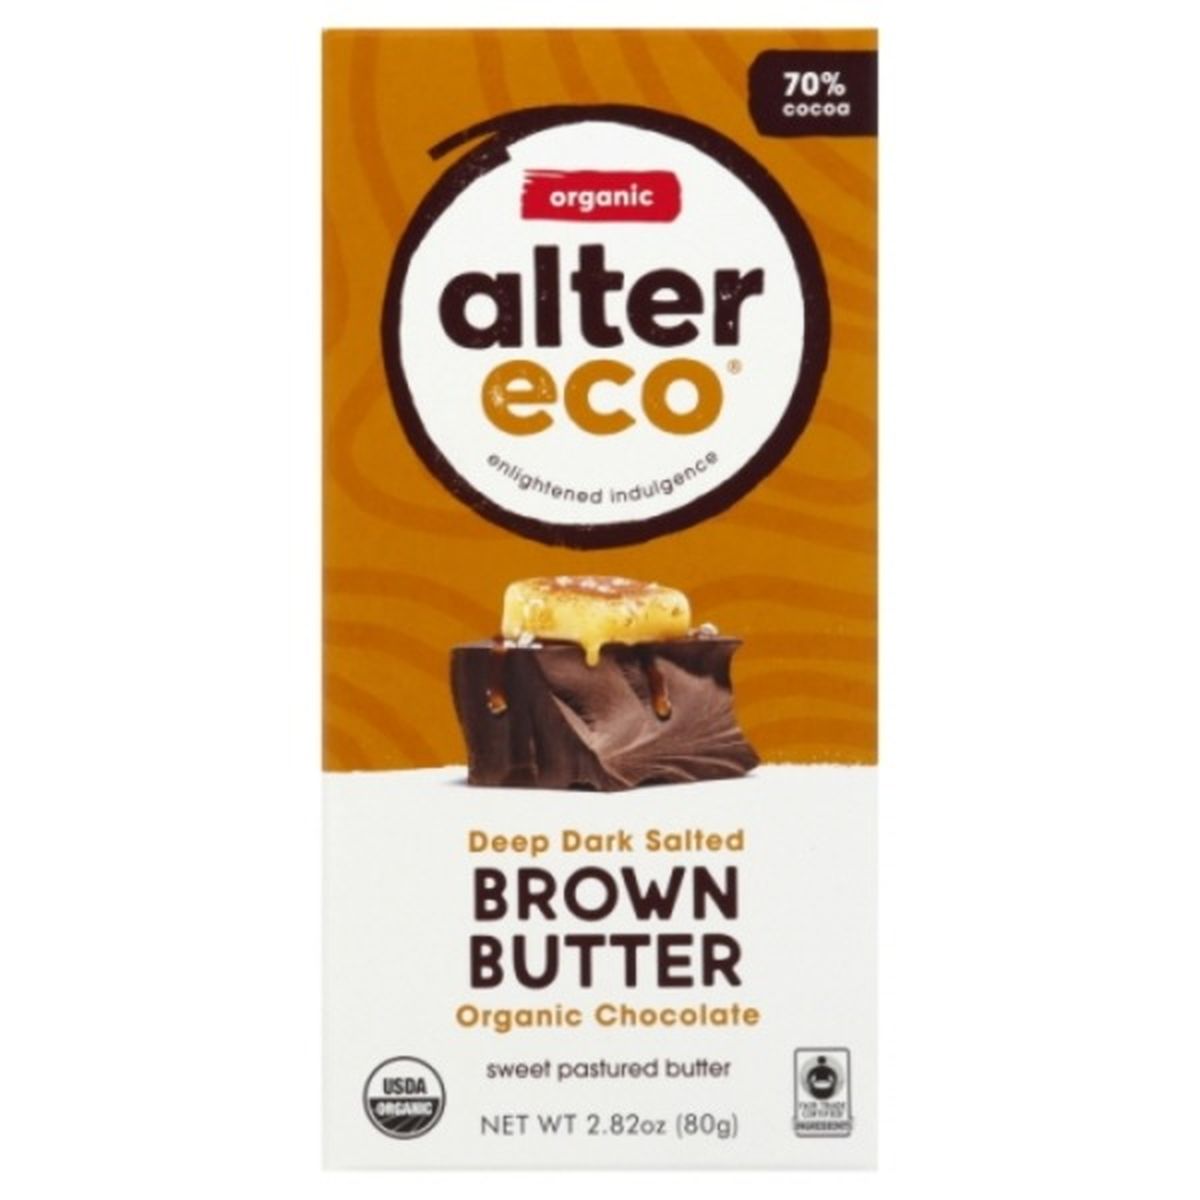 Calories in Alter Eco Dark Chocolate, Organic, Deep Dark Salted, Brown Butter, 70% Cocoa